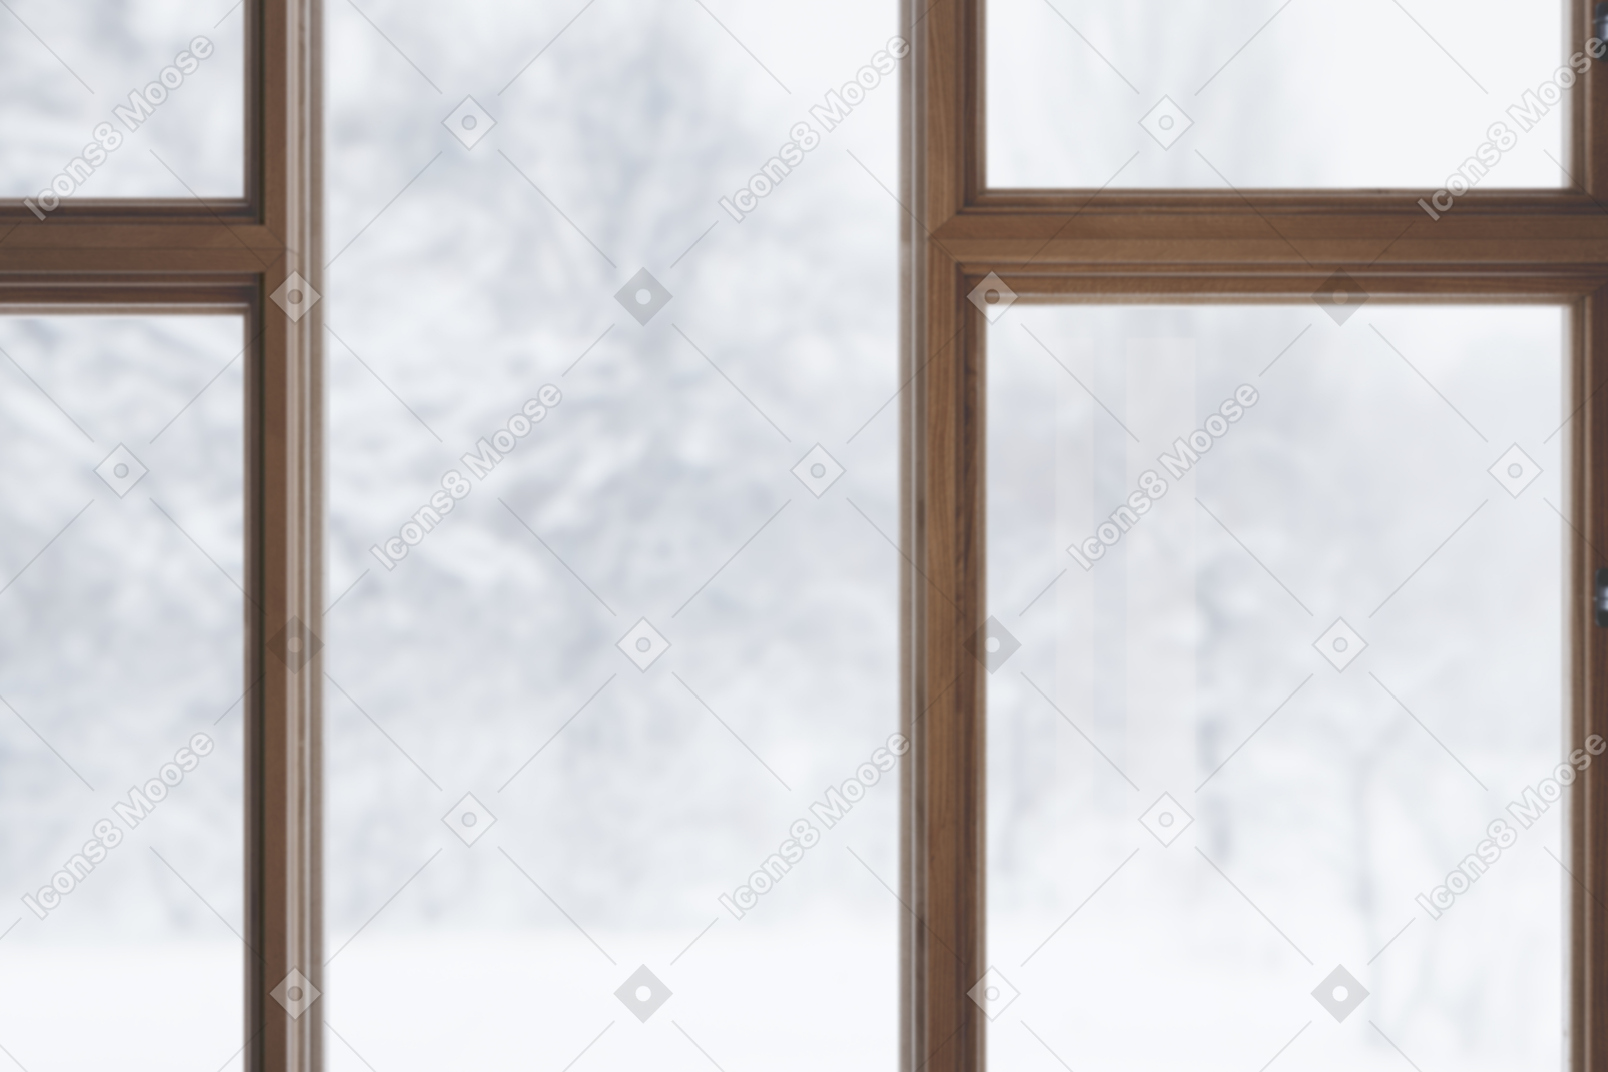 Window with snowy trees outside